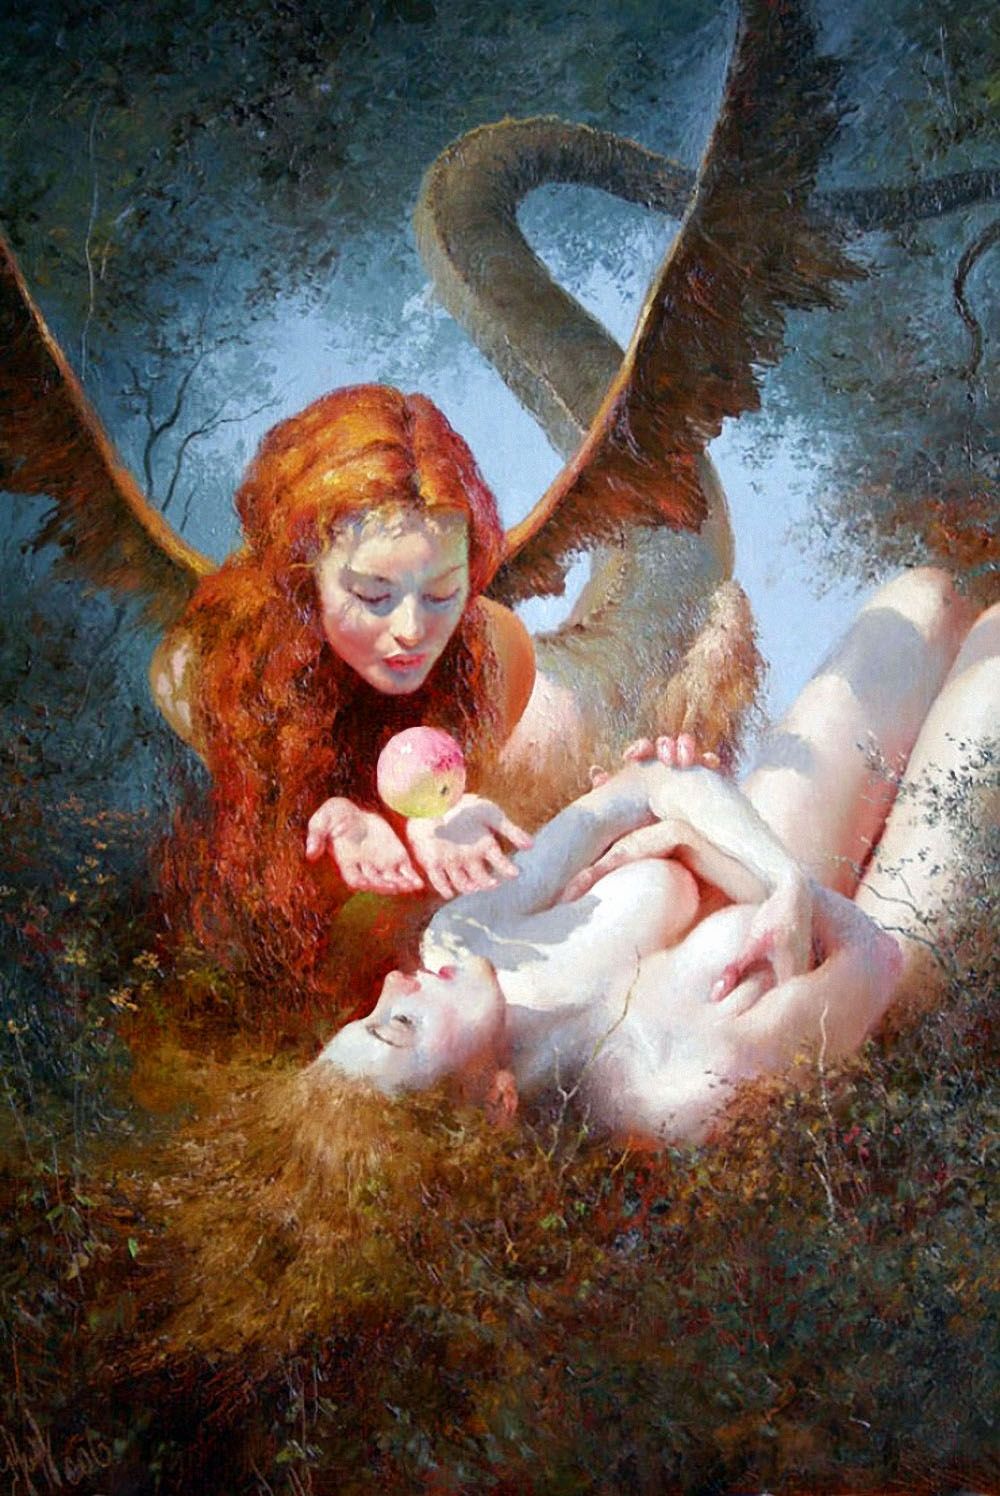 "Lilith and Eve"